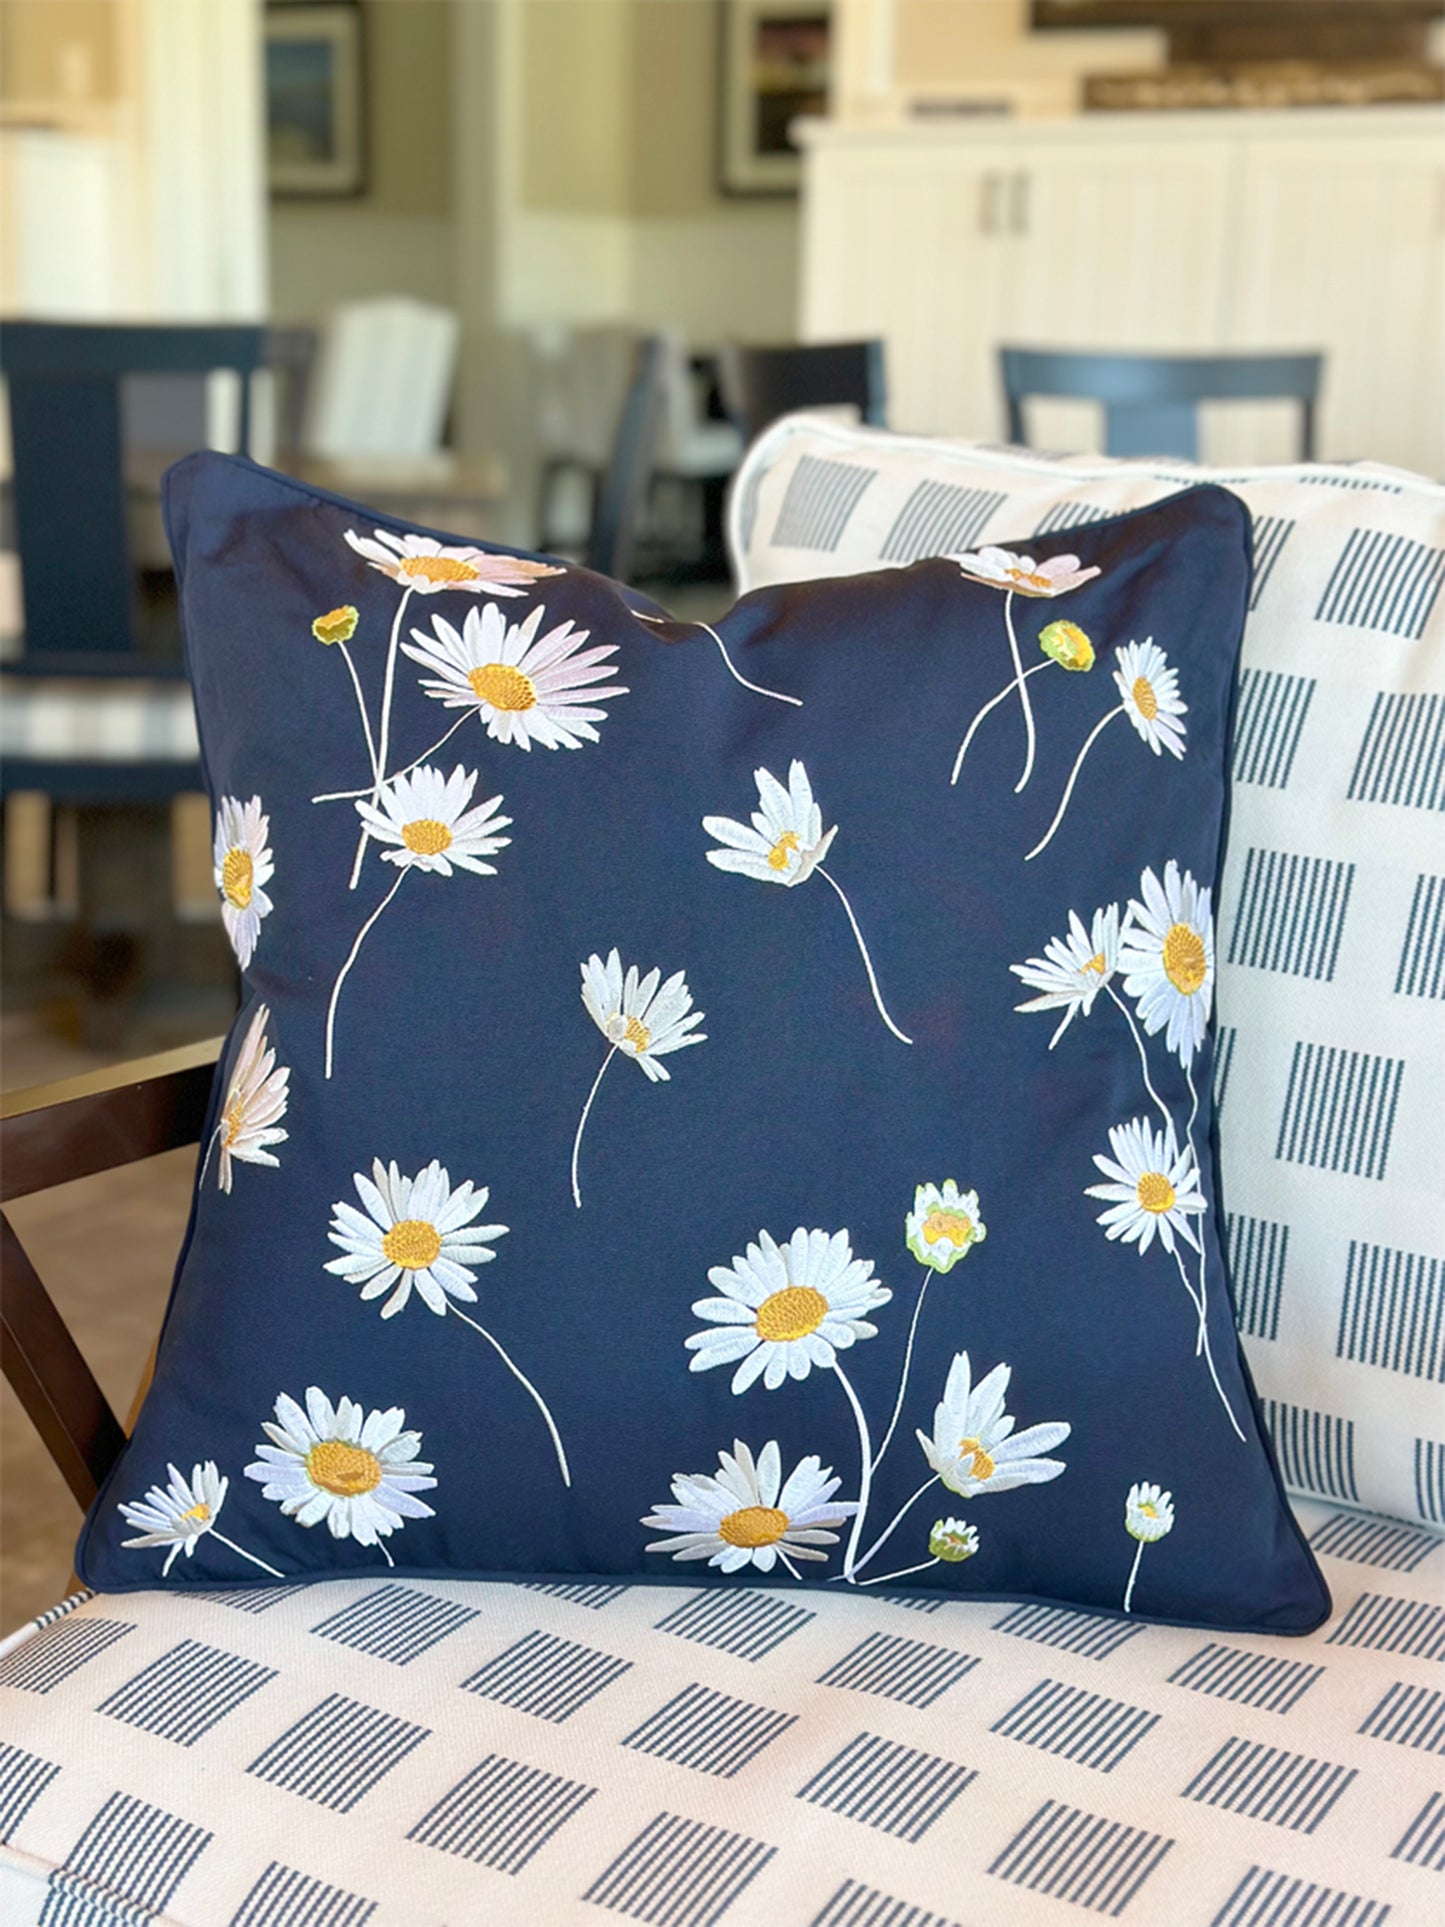 Navy Daisy Indoor Outdoor pillow styled on a chair.